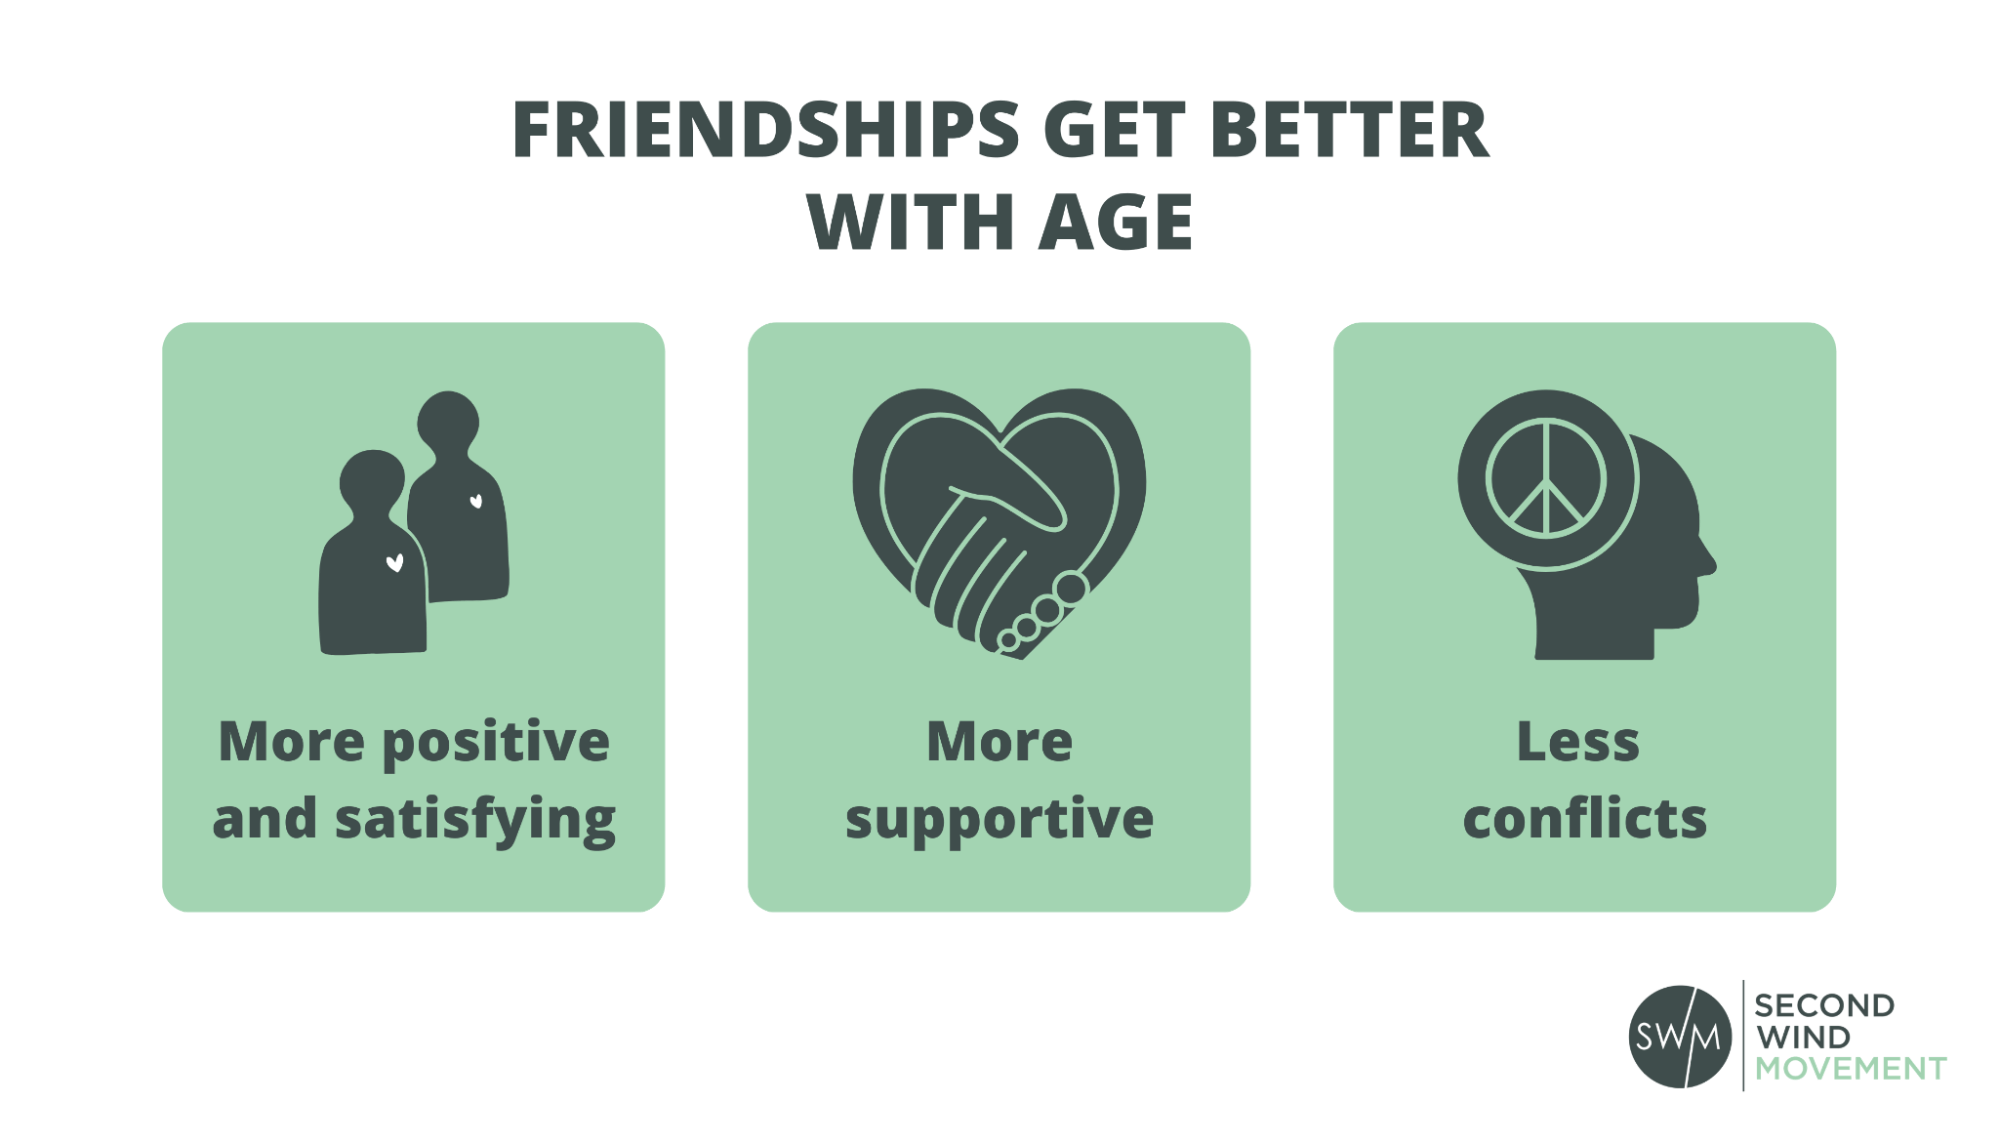 how friendships change with age: they get better